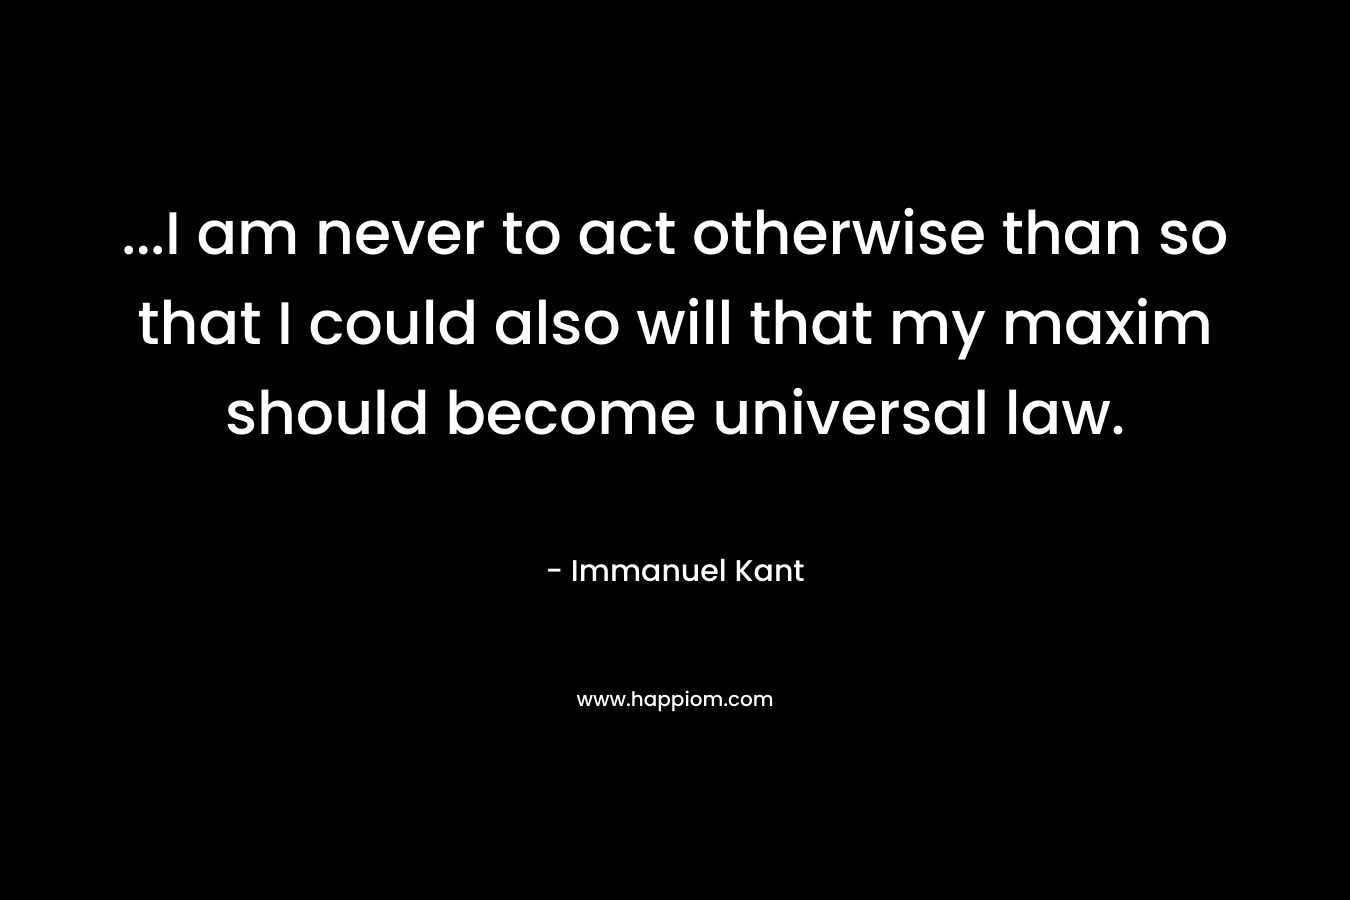 …I am never to act otherwise than so that I could also will that my maxim should become universal law. – Immanuel Kant